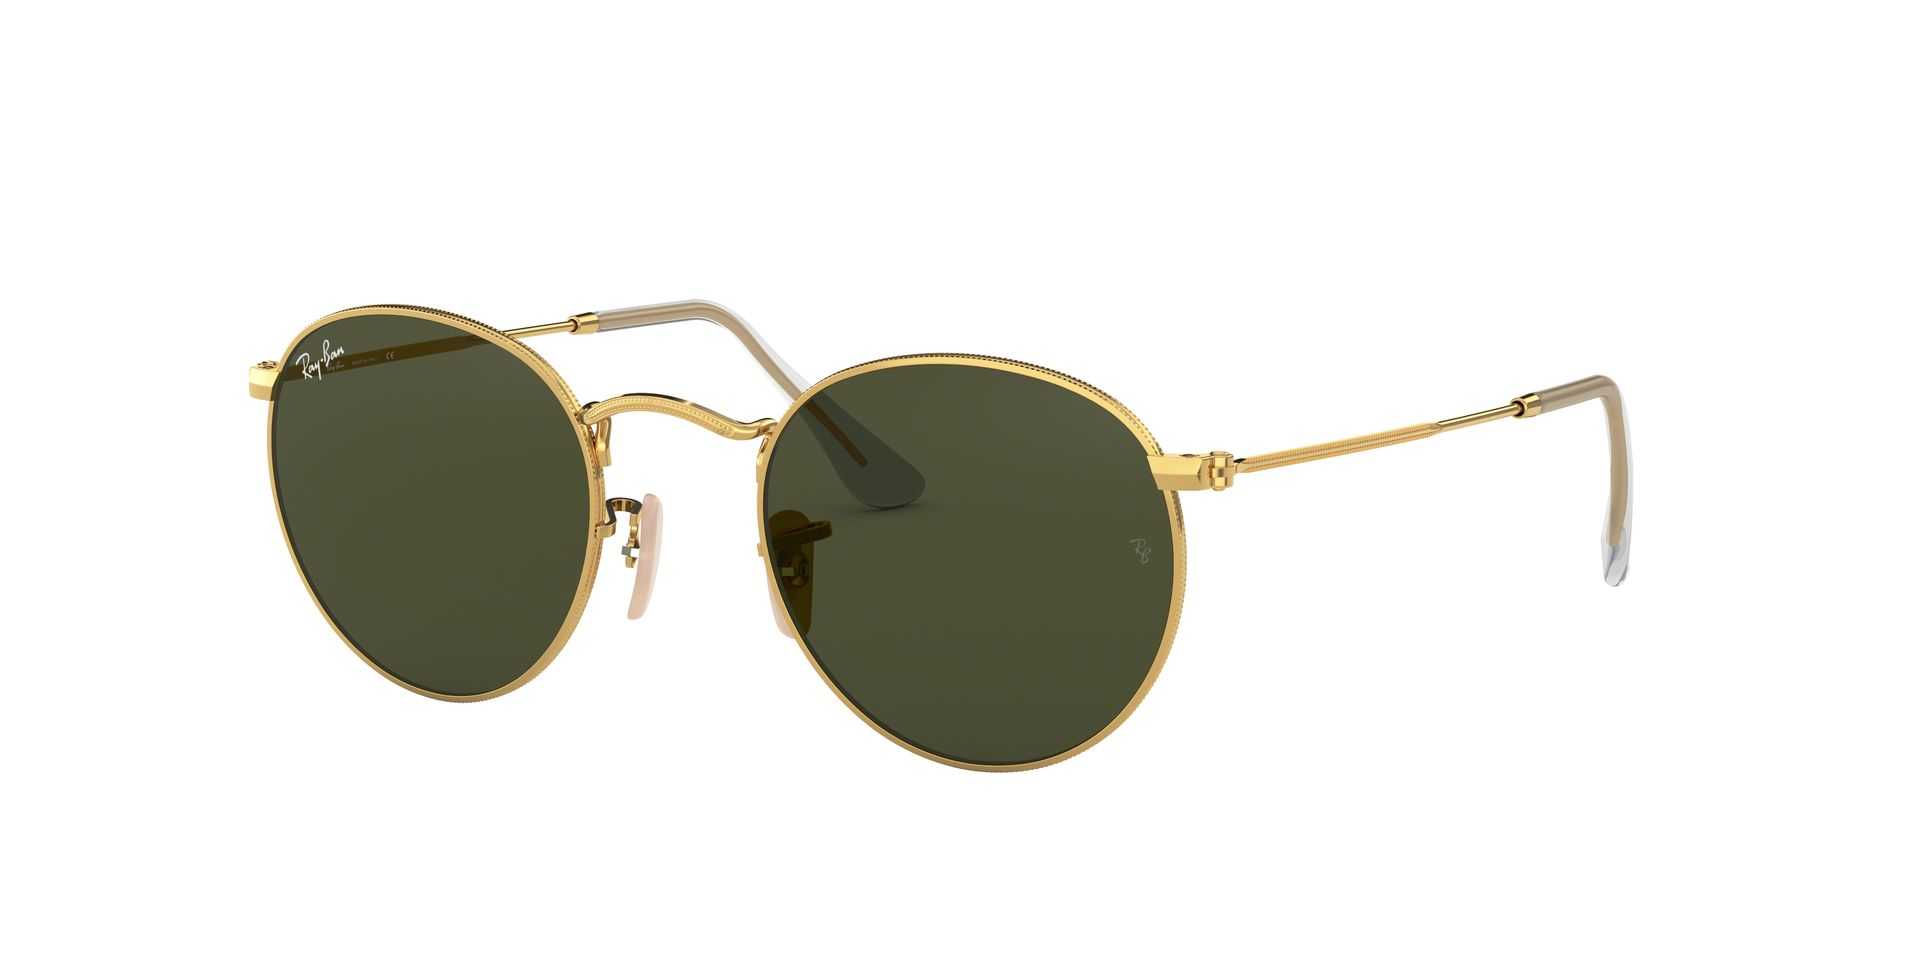 ray ban femme solaire ronde